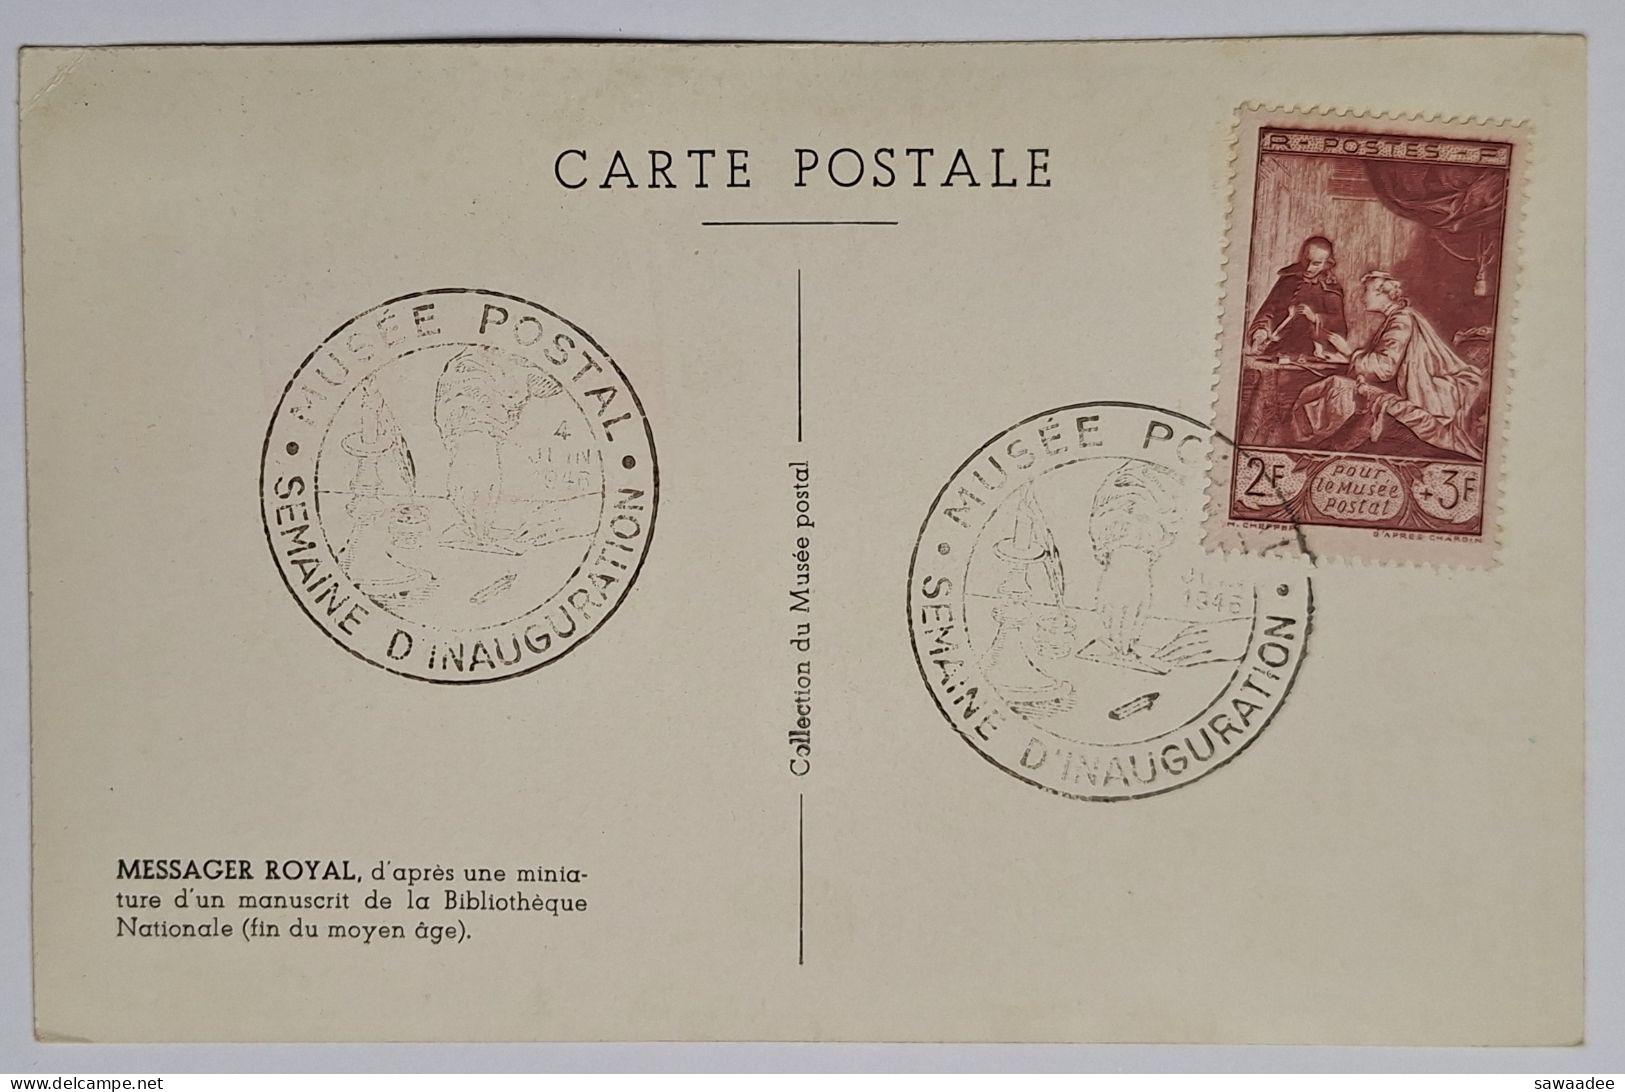 CARTE POSTALE FRANCE - MUSEE POSTAL - SEMAINE D'INAUGURATION - MESSAGER ROYAL - Postal Services